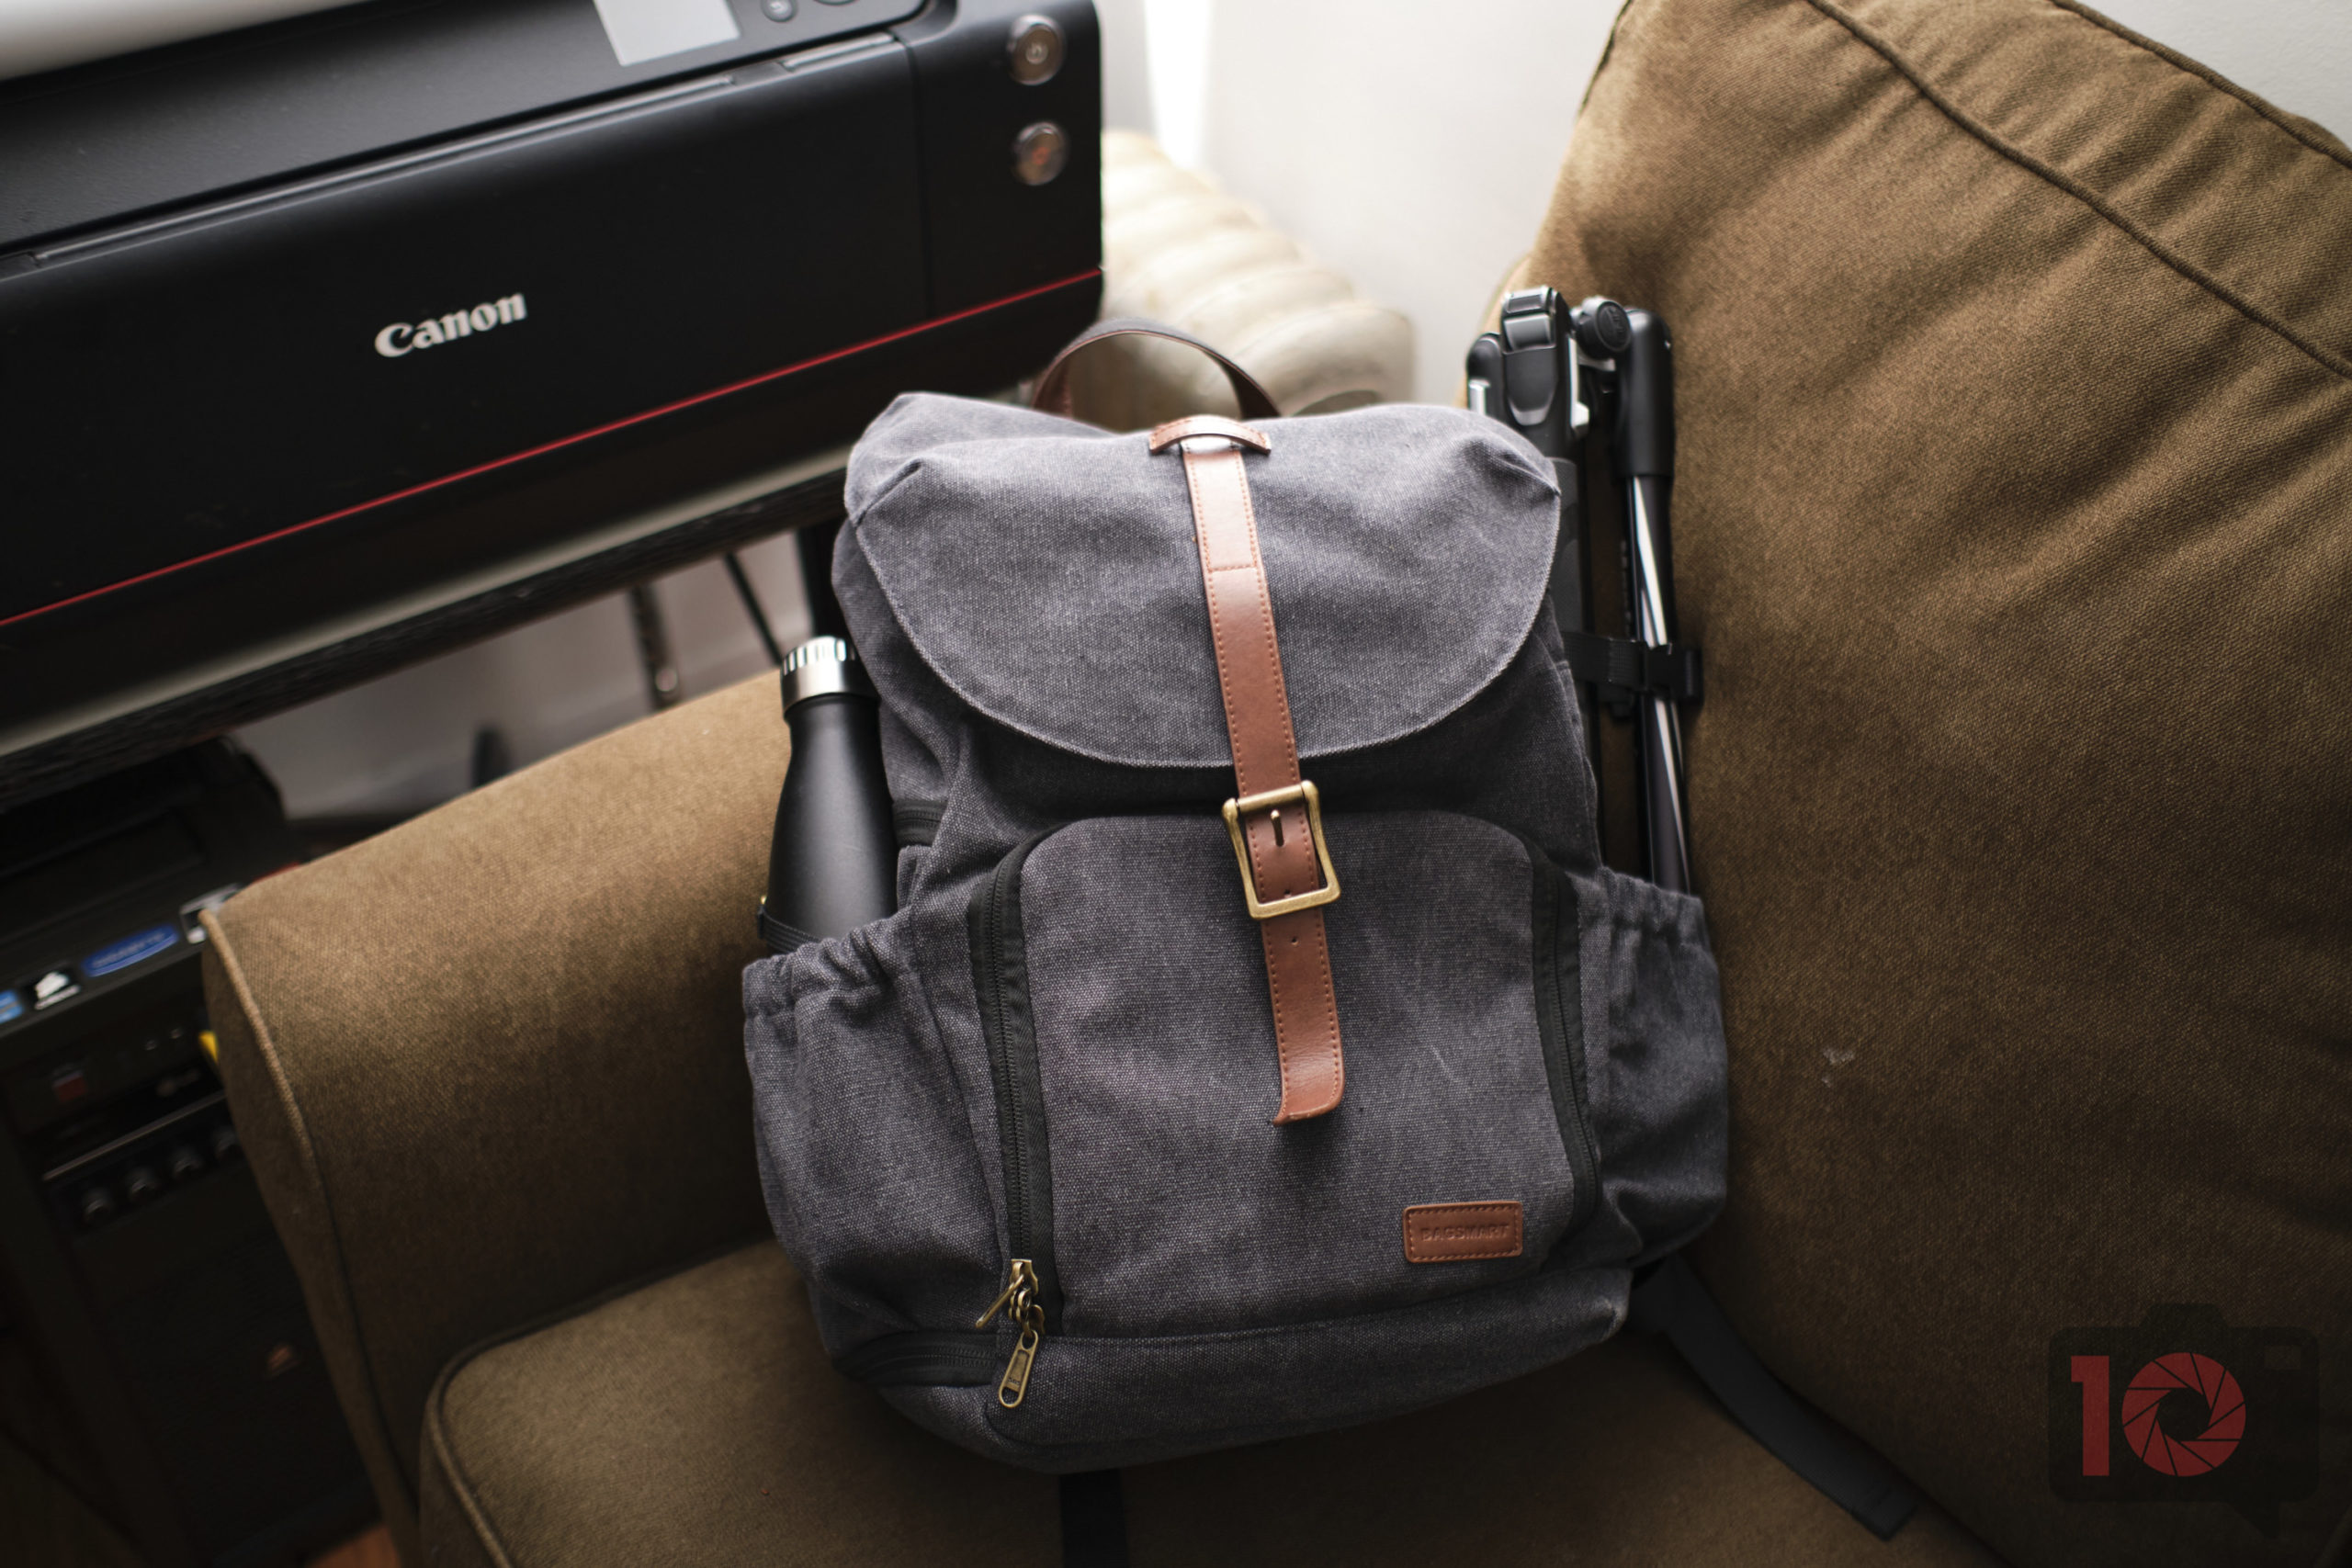 Less Than $65 and Great! The BAGSMART Camera Backpack Review